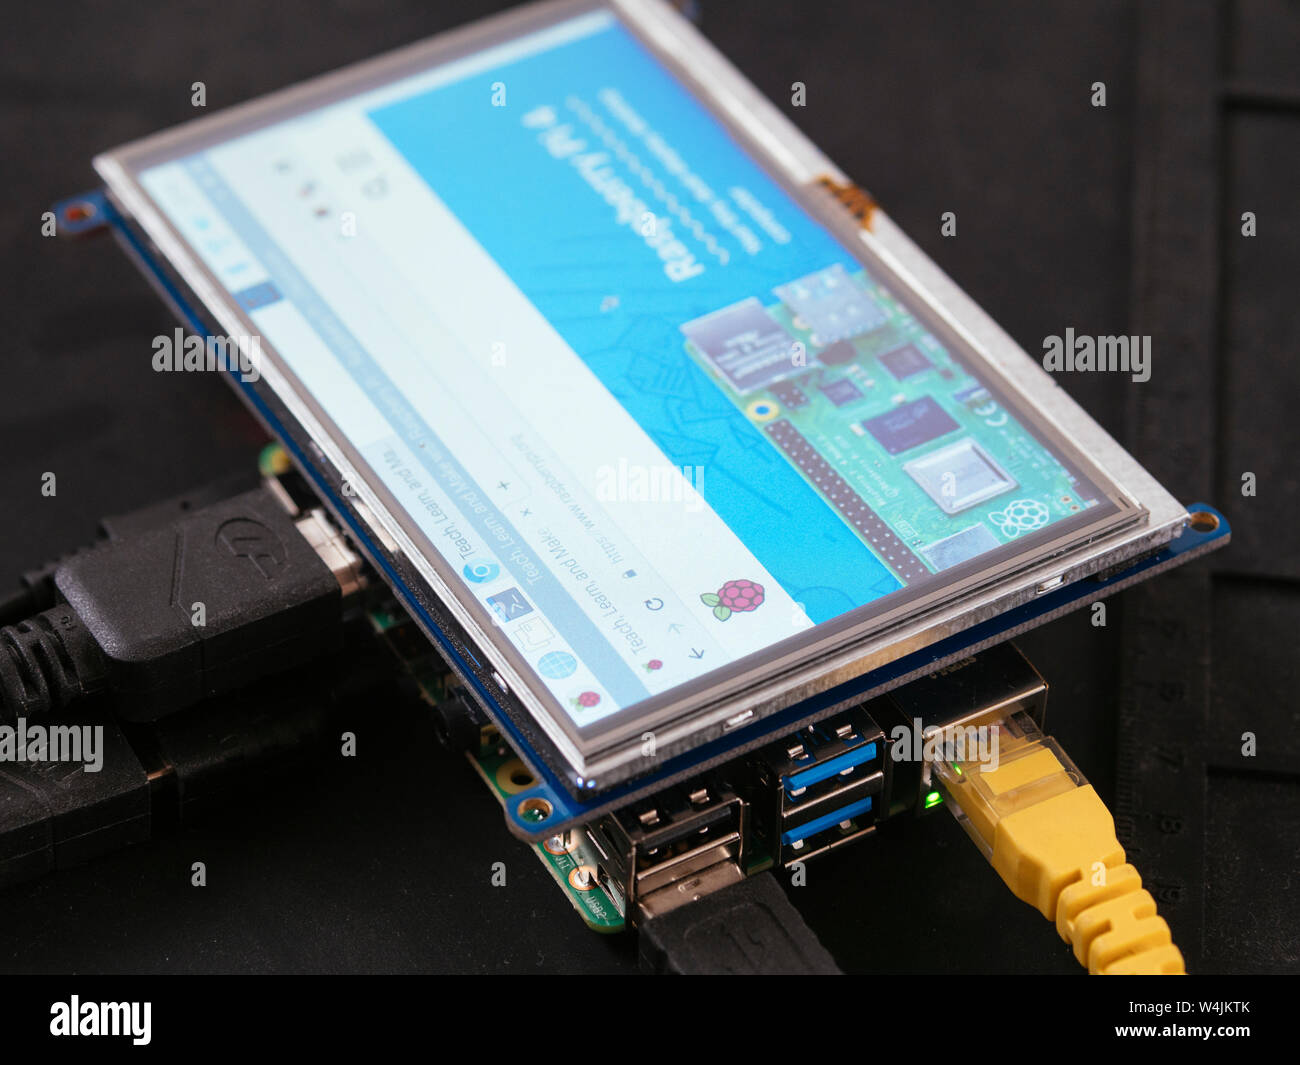 Raspbery Pi 4 Model B with a 5 inch LCD touchscreen display. Stock Photo